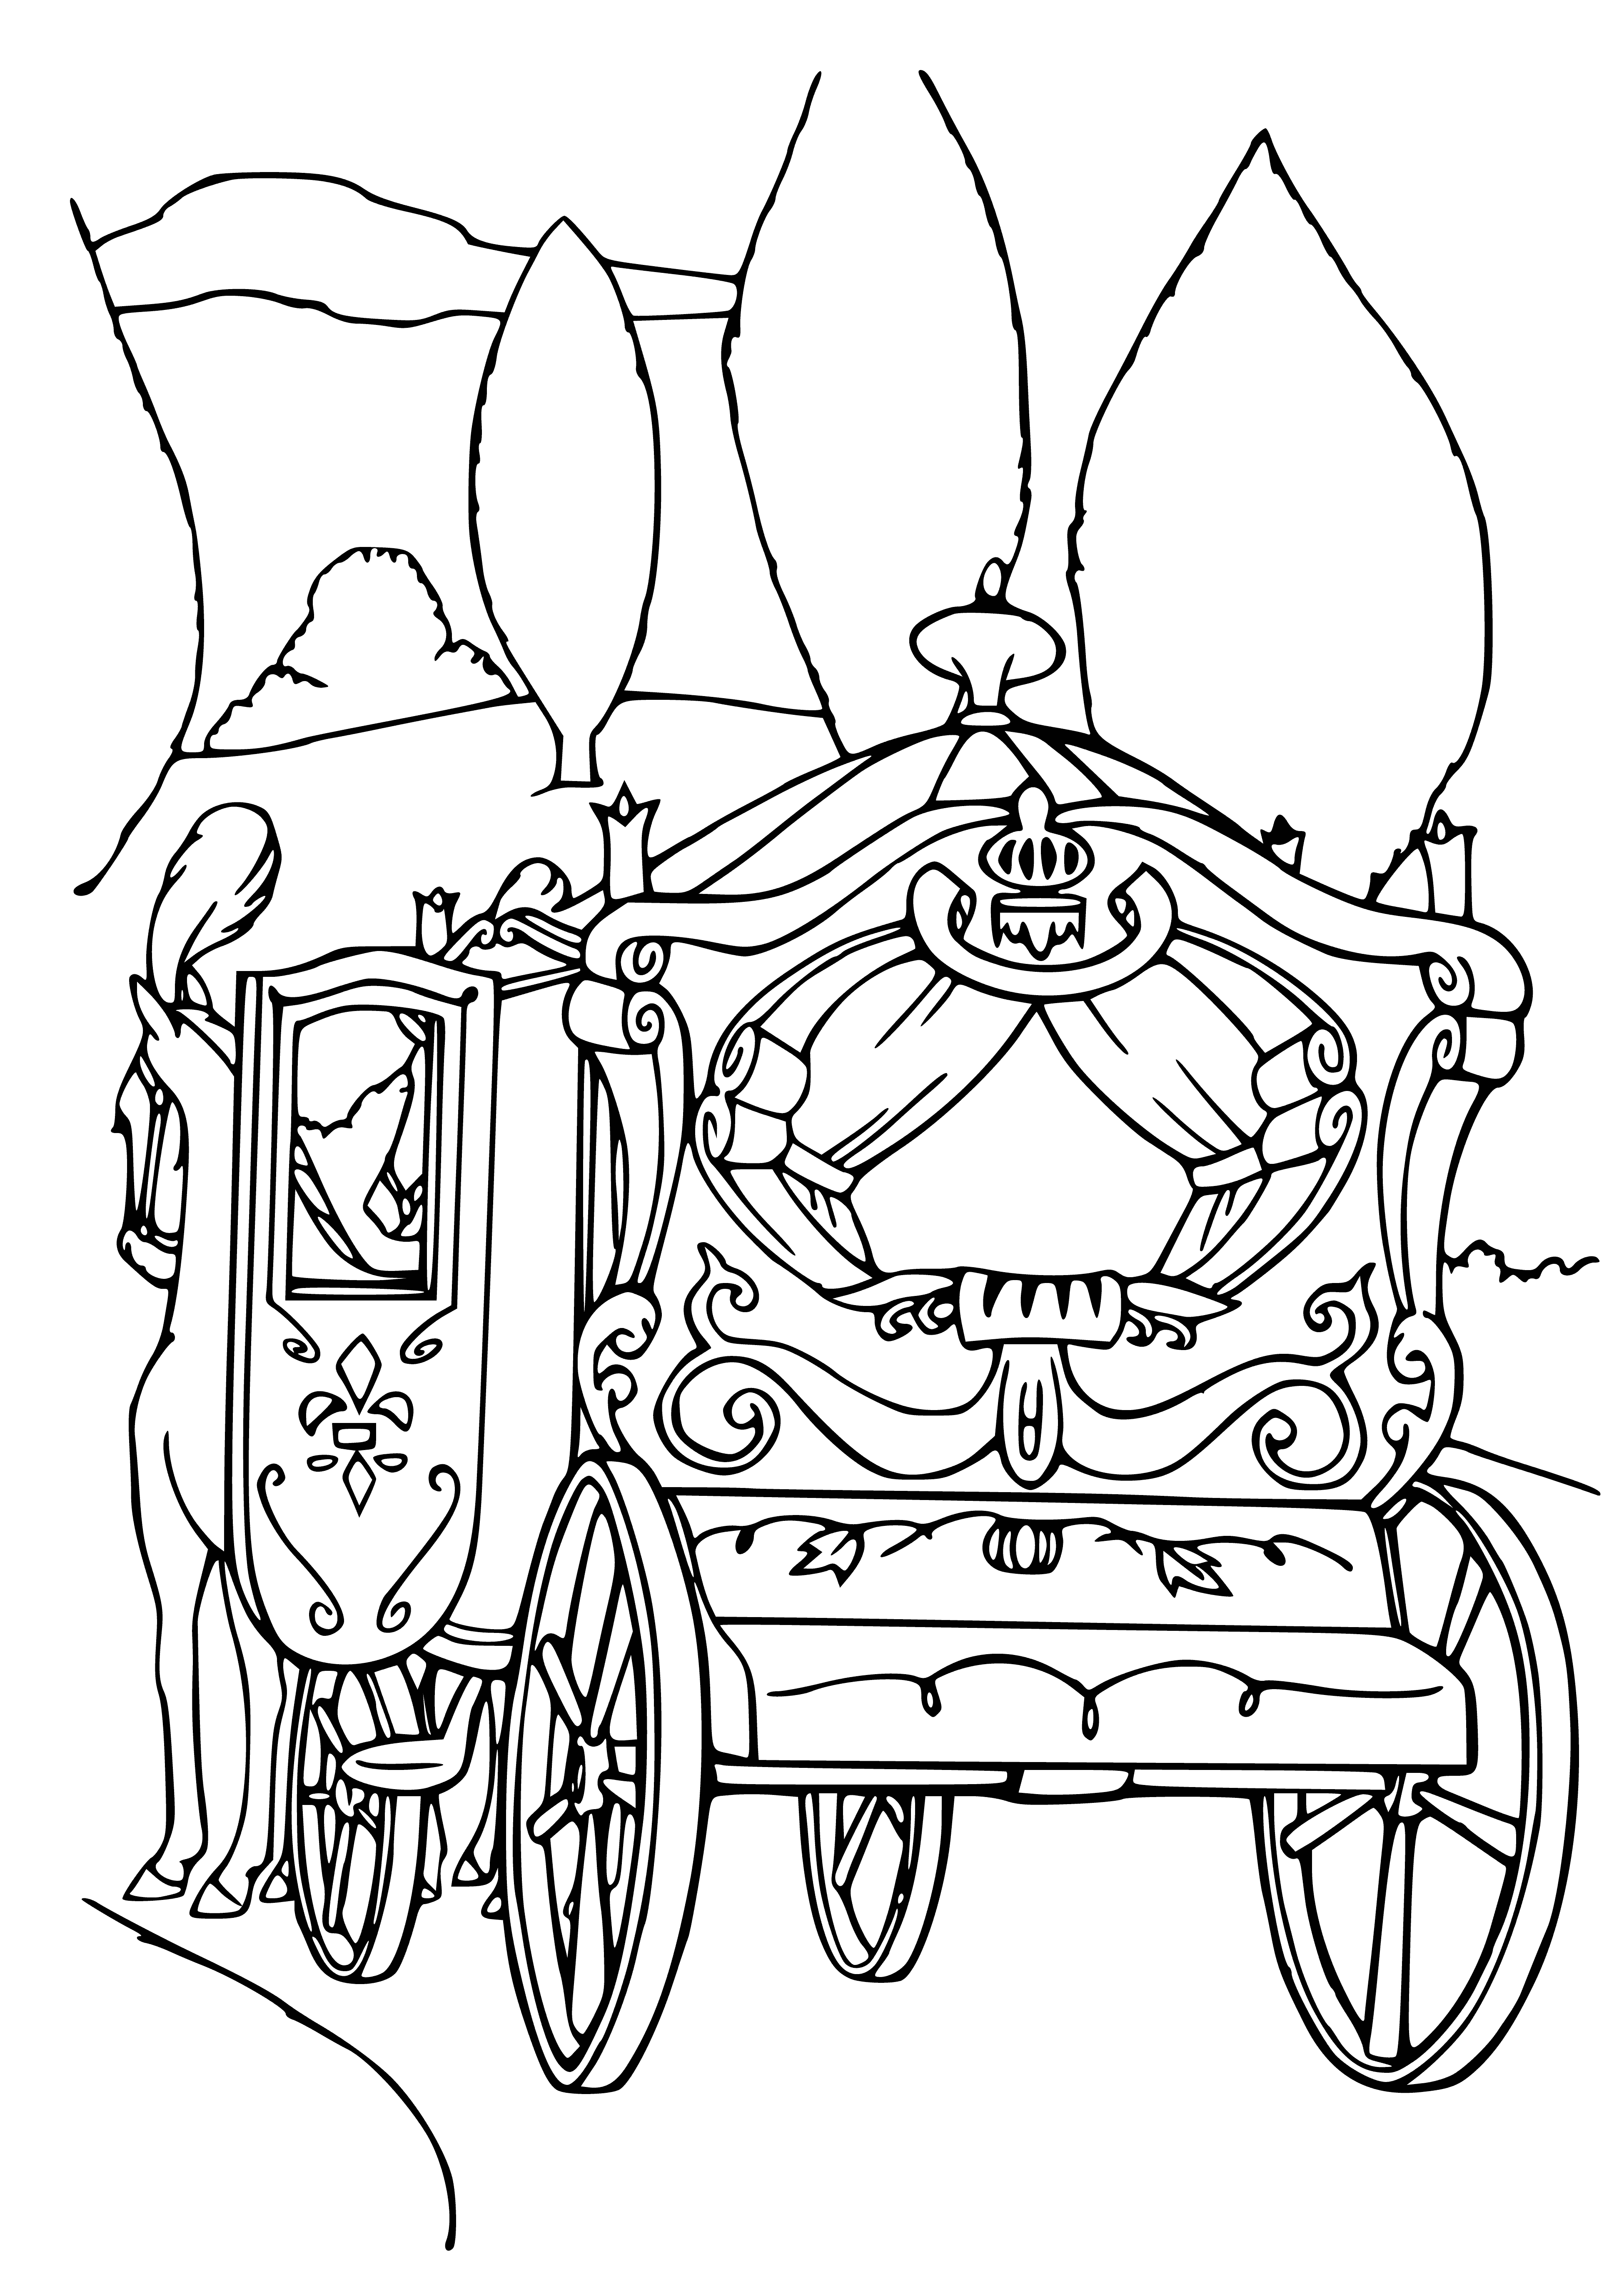 coloring page: Cinderella's fairy-tale ended with a pumpkin turned carriage, mice-horses & her getting her prince. They rode off into the sunset to live happily ever after.